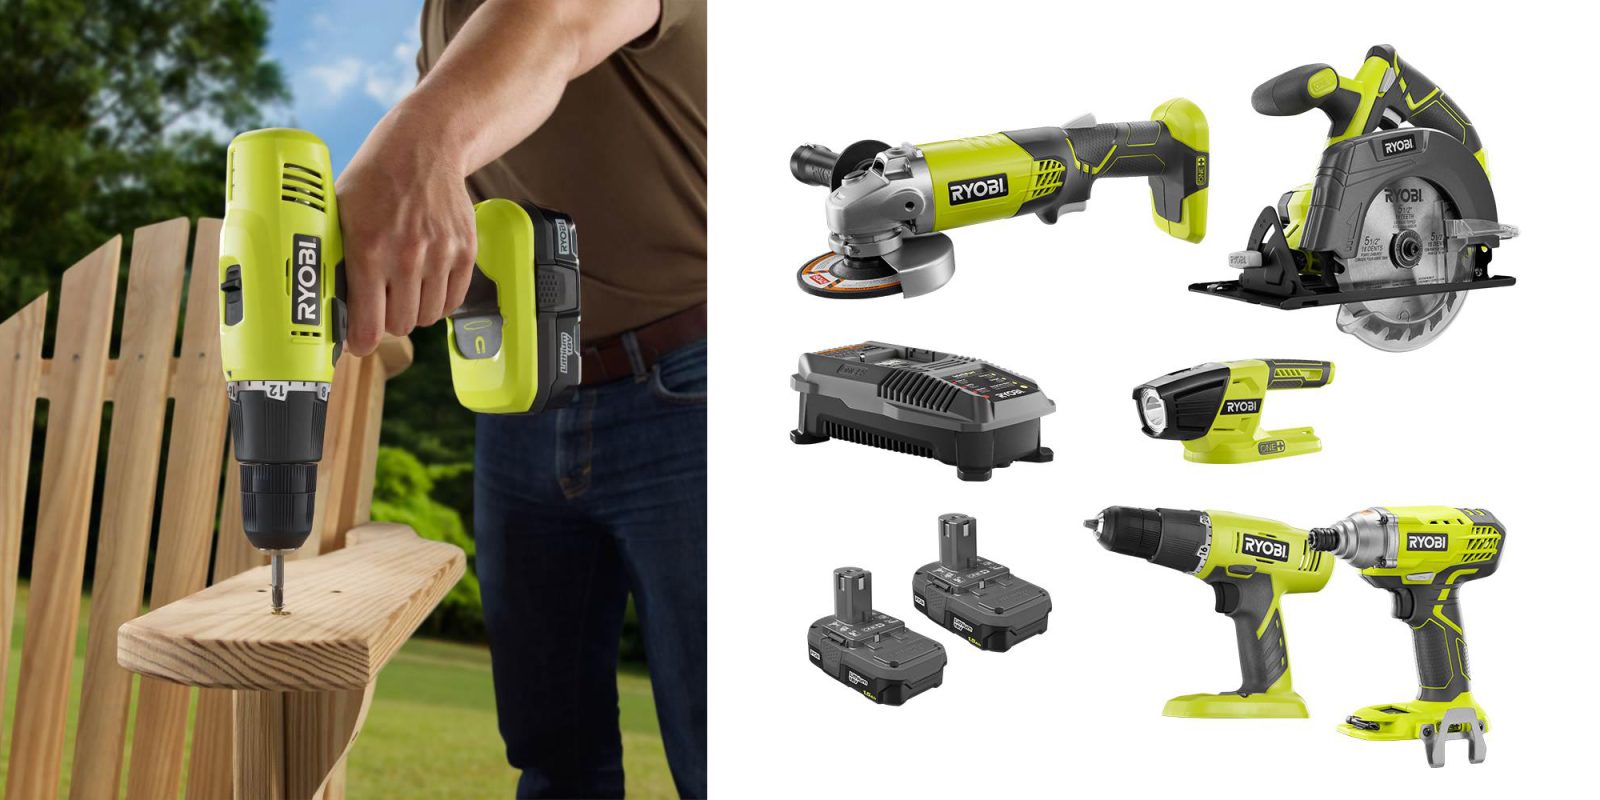 This 5-tool Ryobi Combo Kit includes two batteries for $149 (Reg. $225